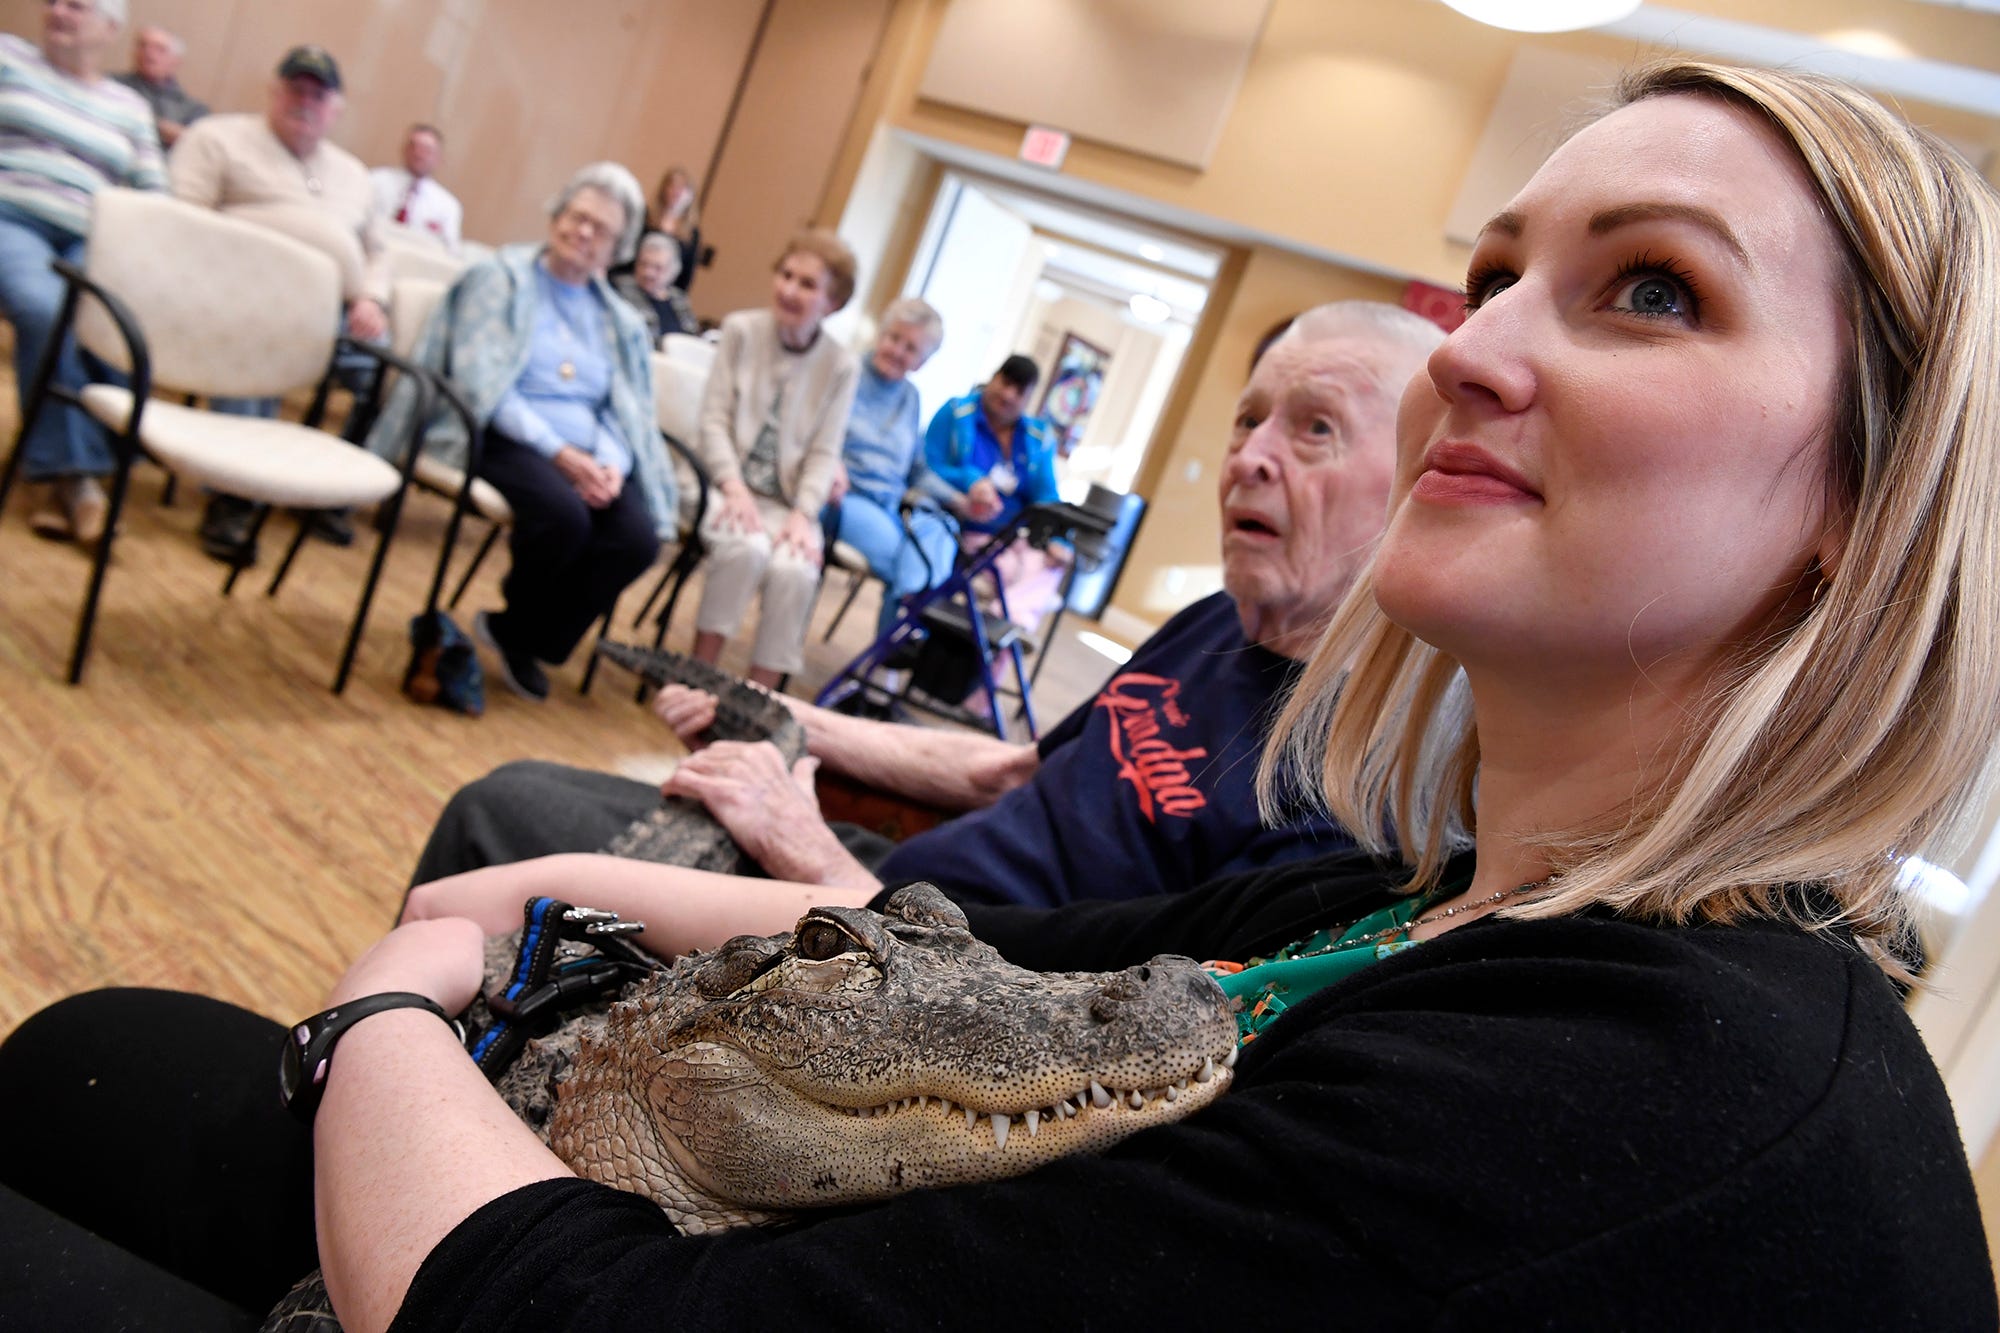 Holly Armstrong, Community Life Enrichment Director, right, and Ron Snyder, 88, cuddle with Wally the emotional support alligator, Monday, January 14, 2019.
John A. Pavoncello photo